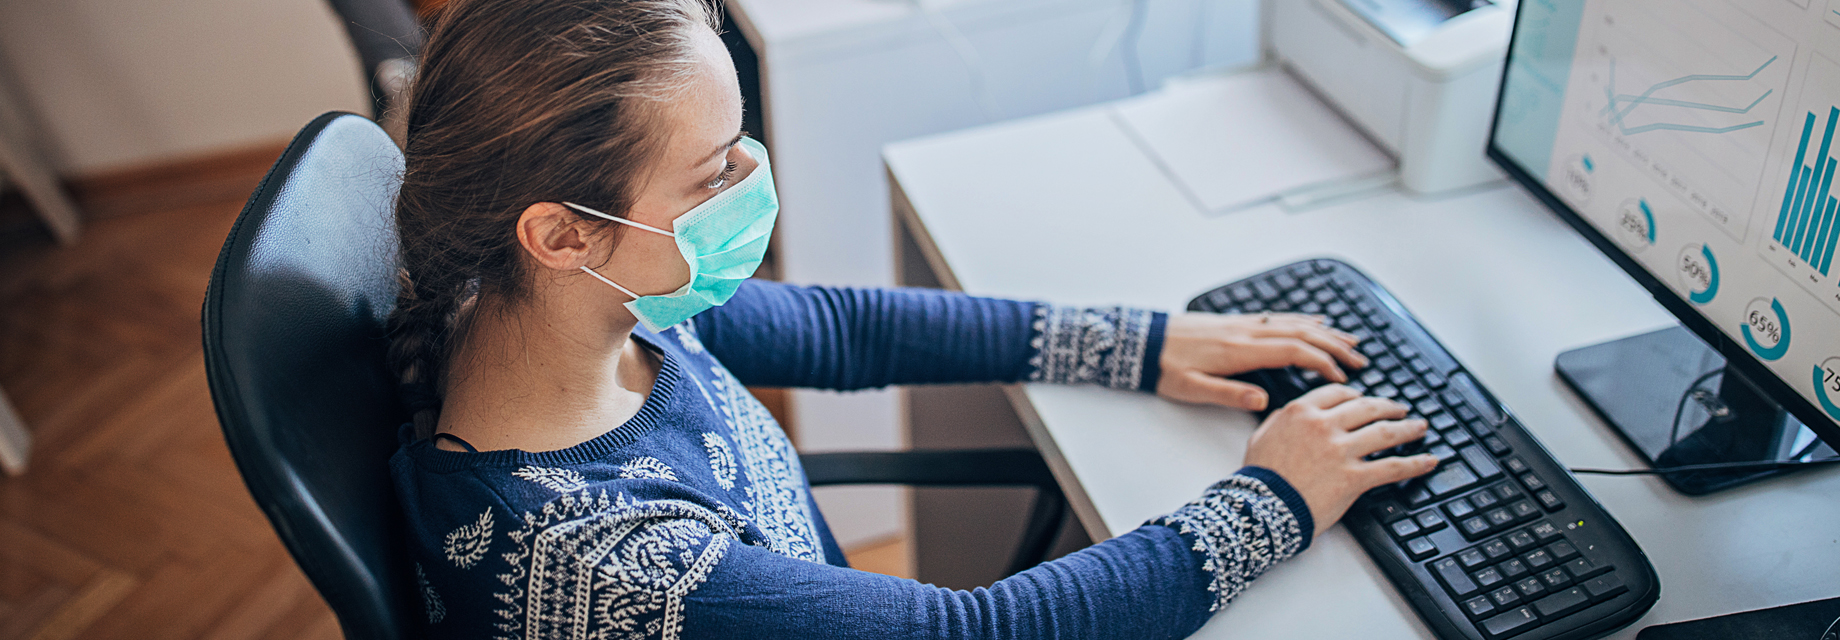 Woman working at her desk while wearing a disposable mask